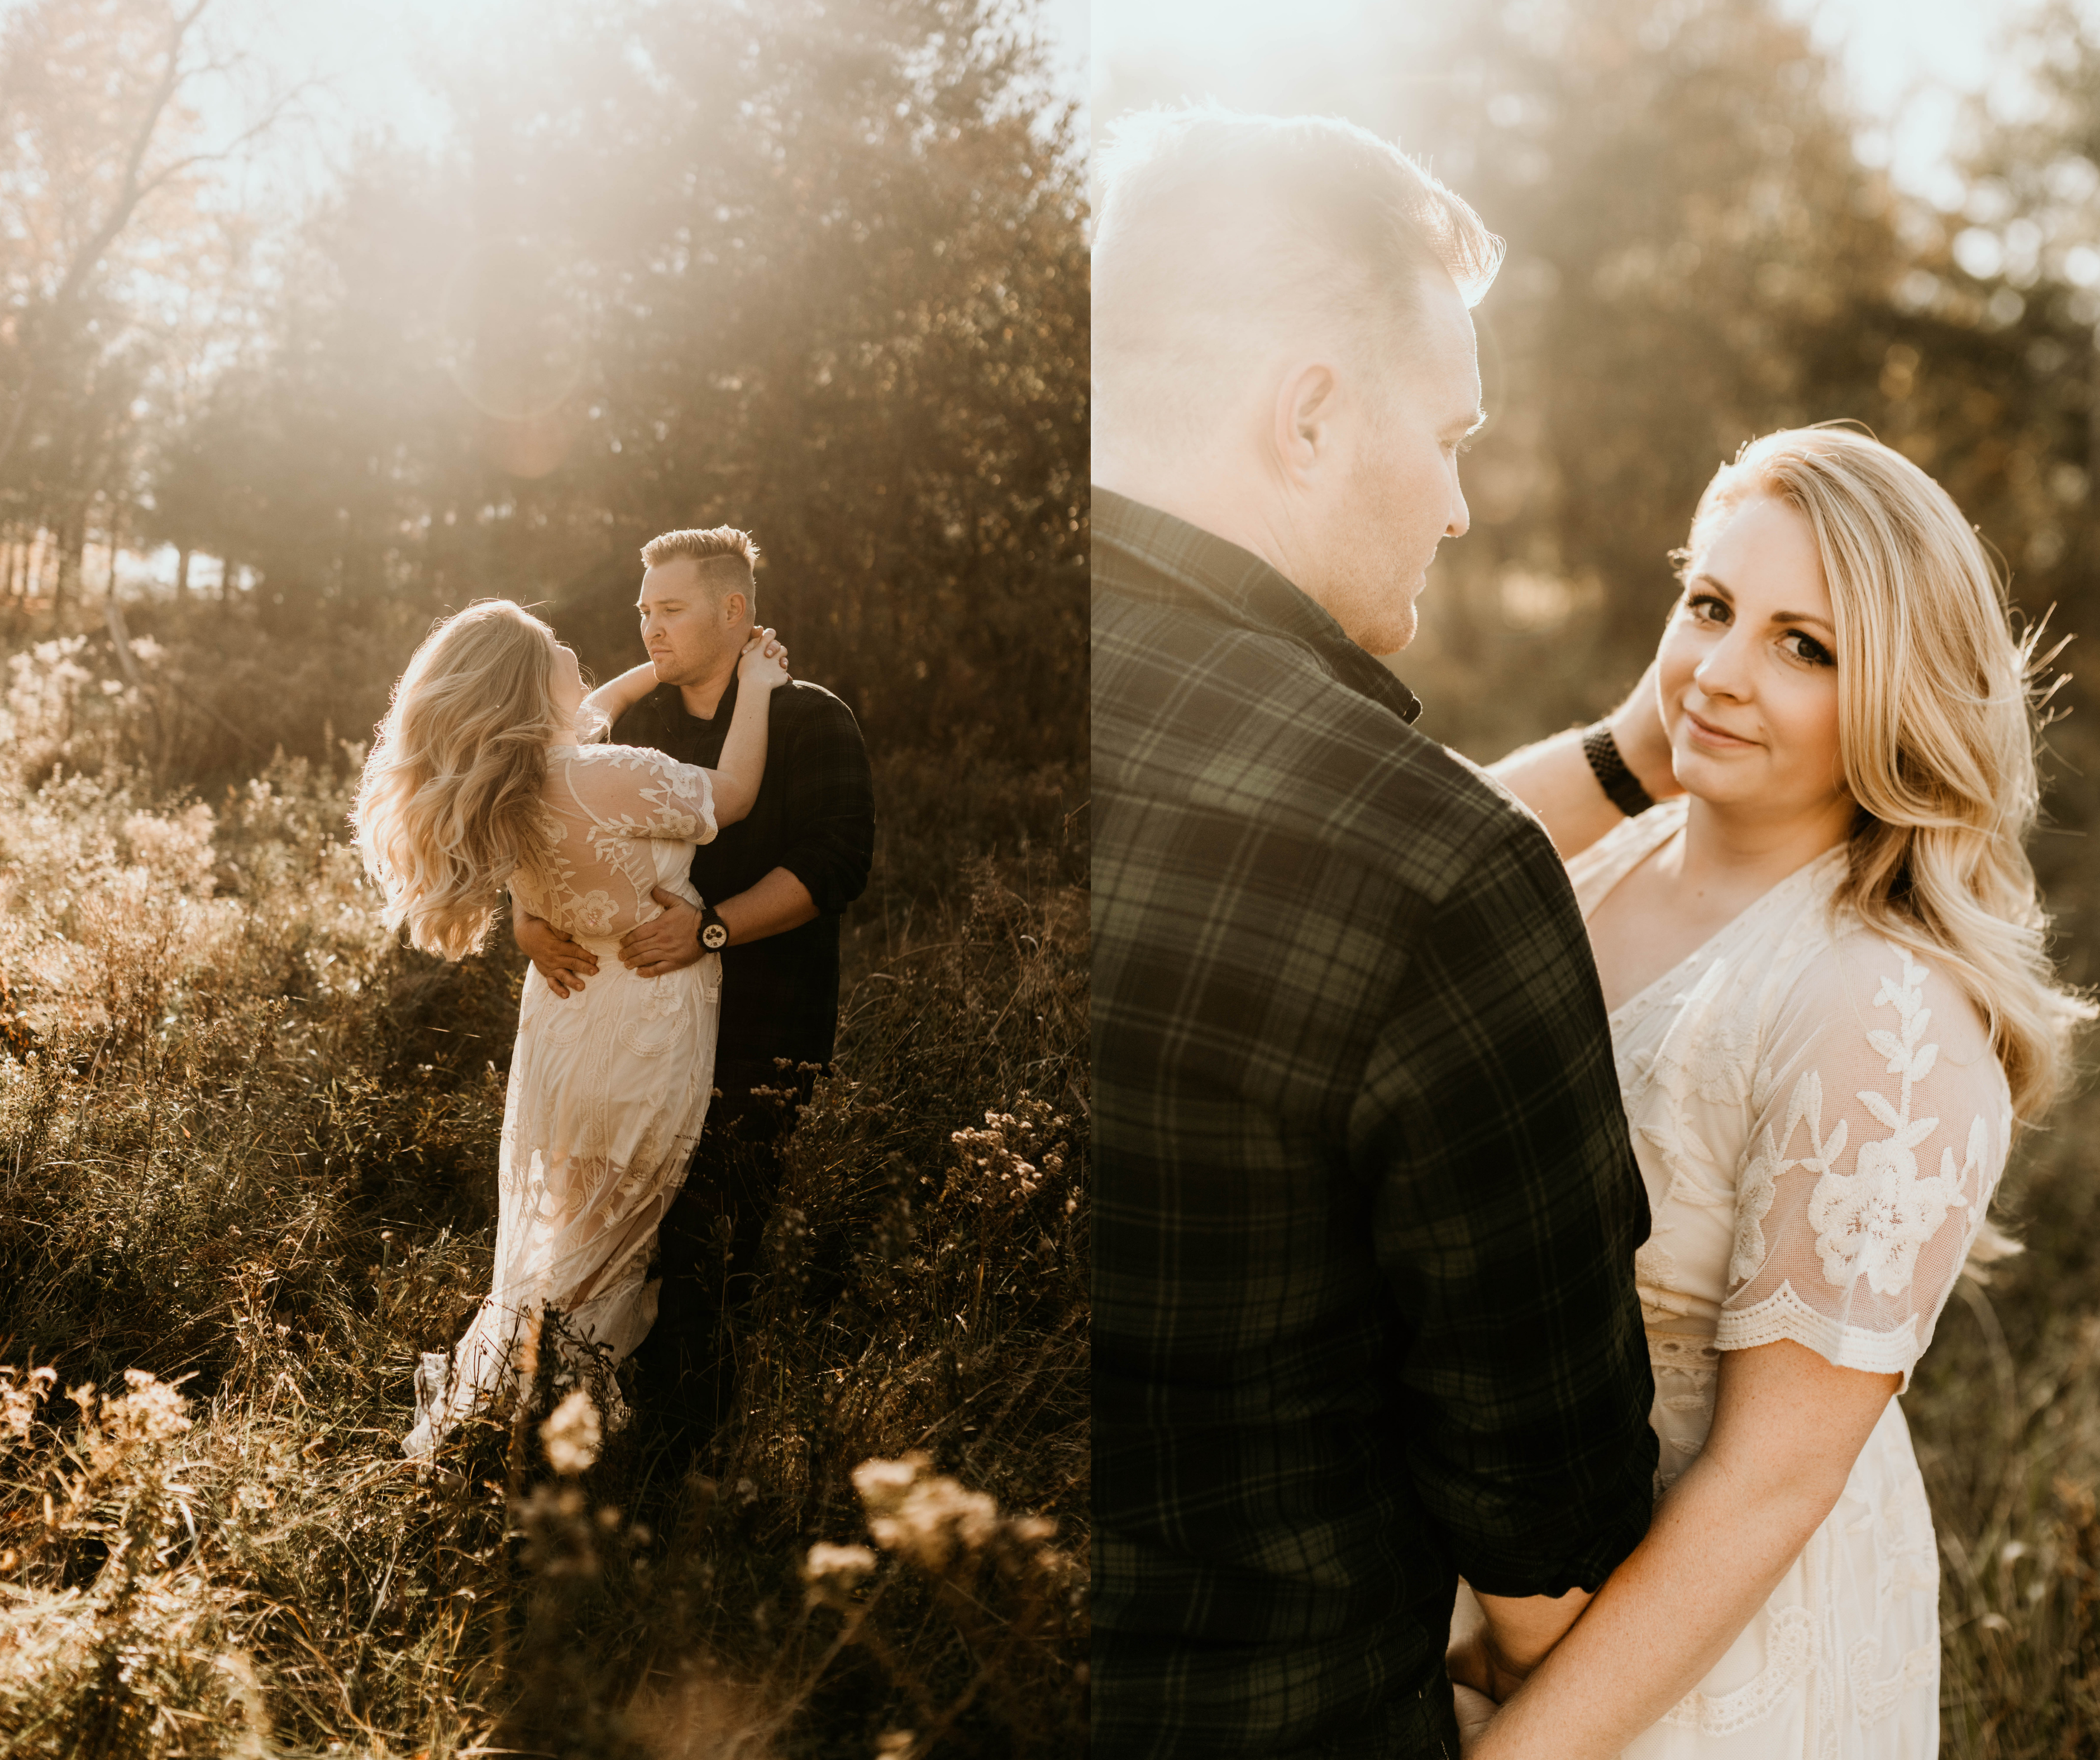 engagement photos at a local park during golden hour - located near cleveland Ohio